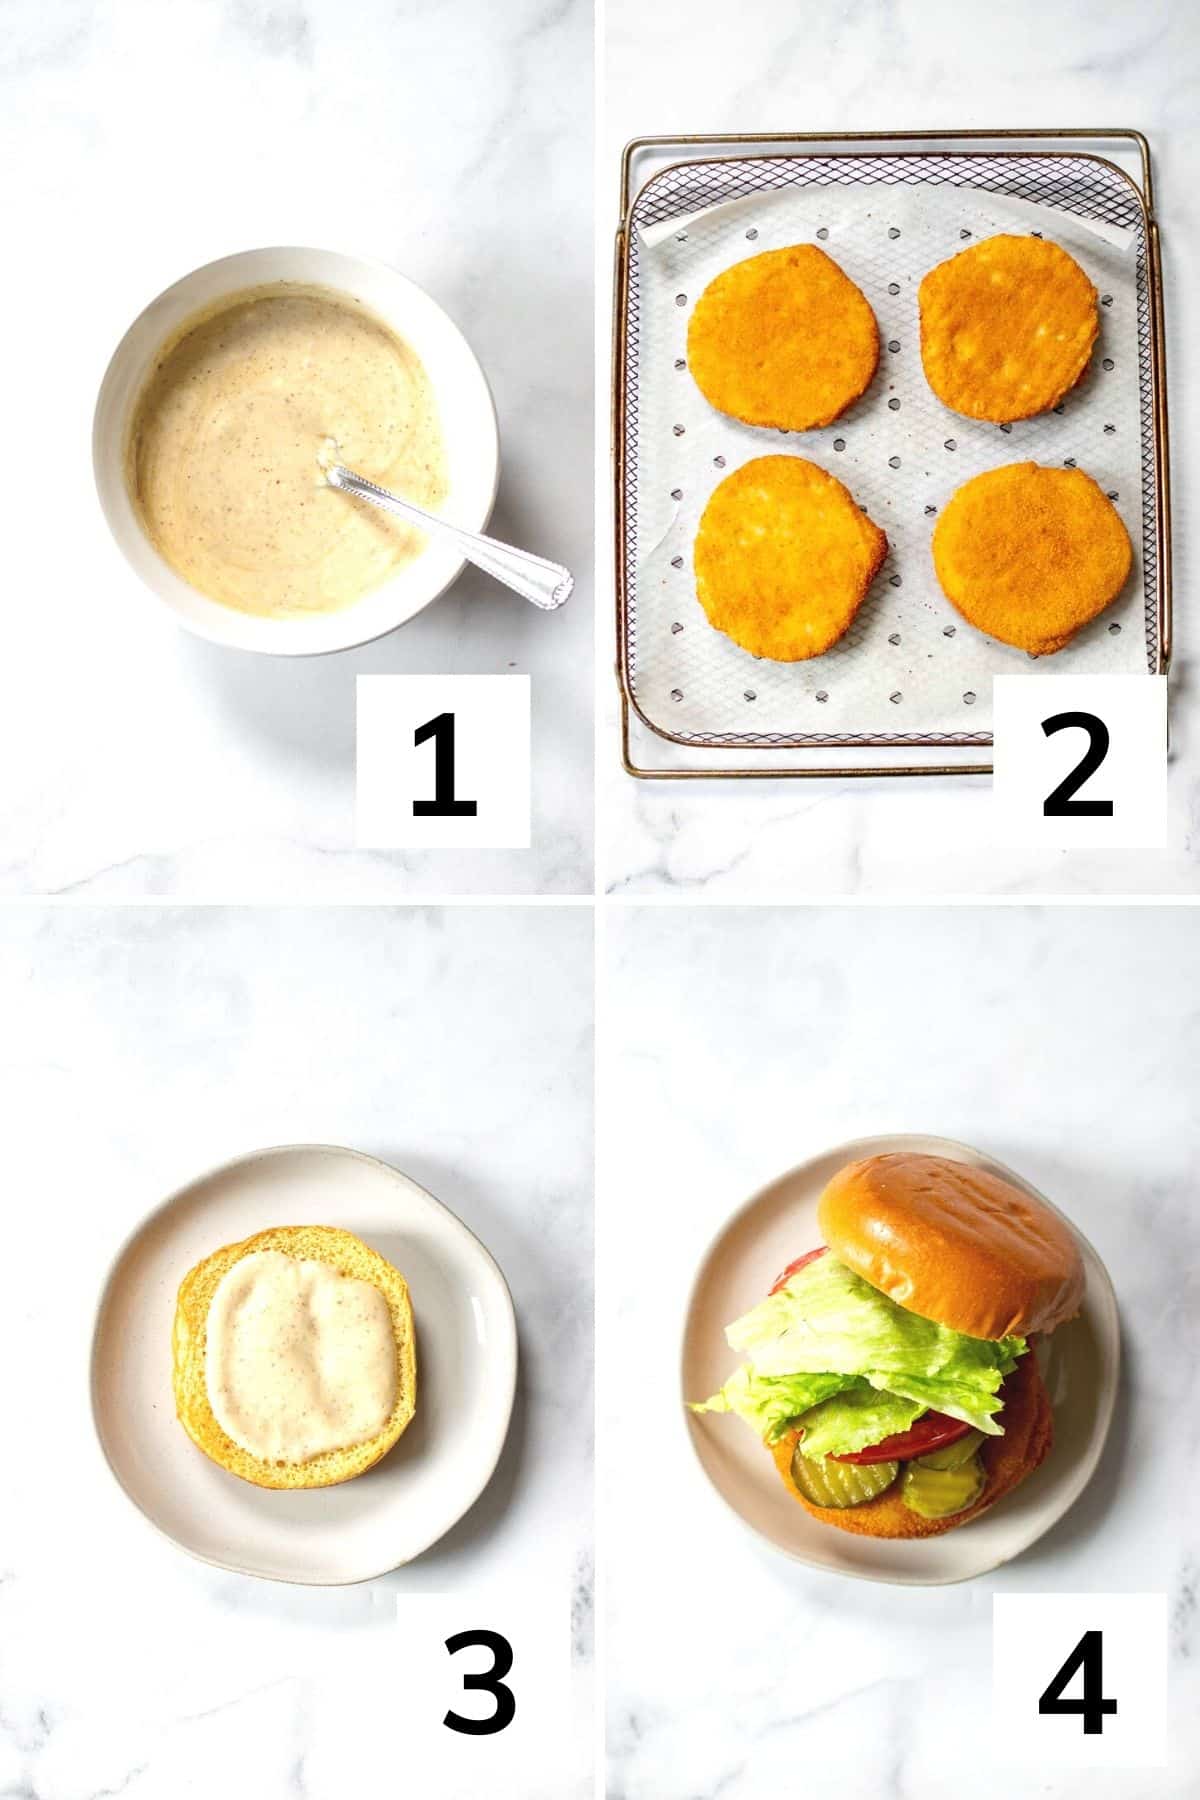 how to make frozen chicken patties in the air fryer step by step